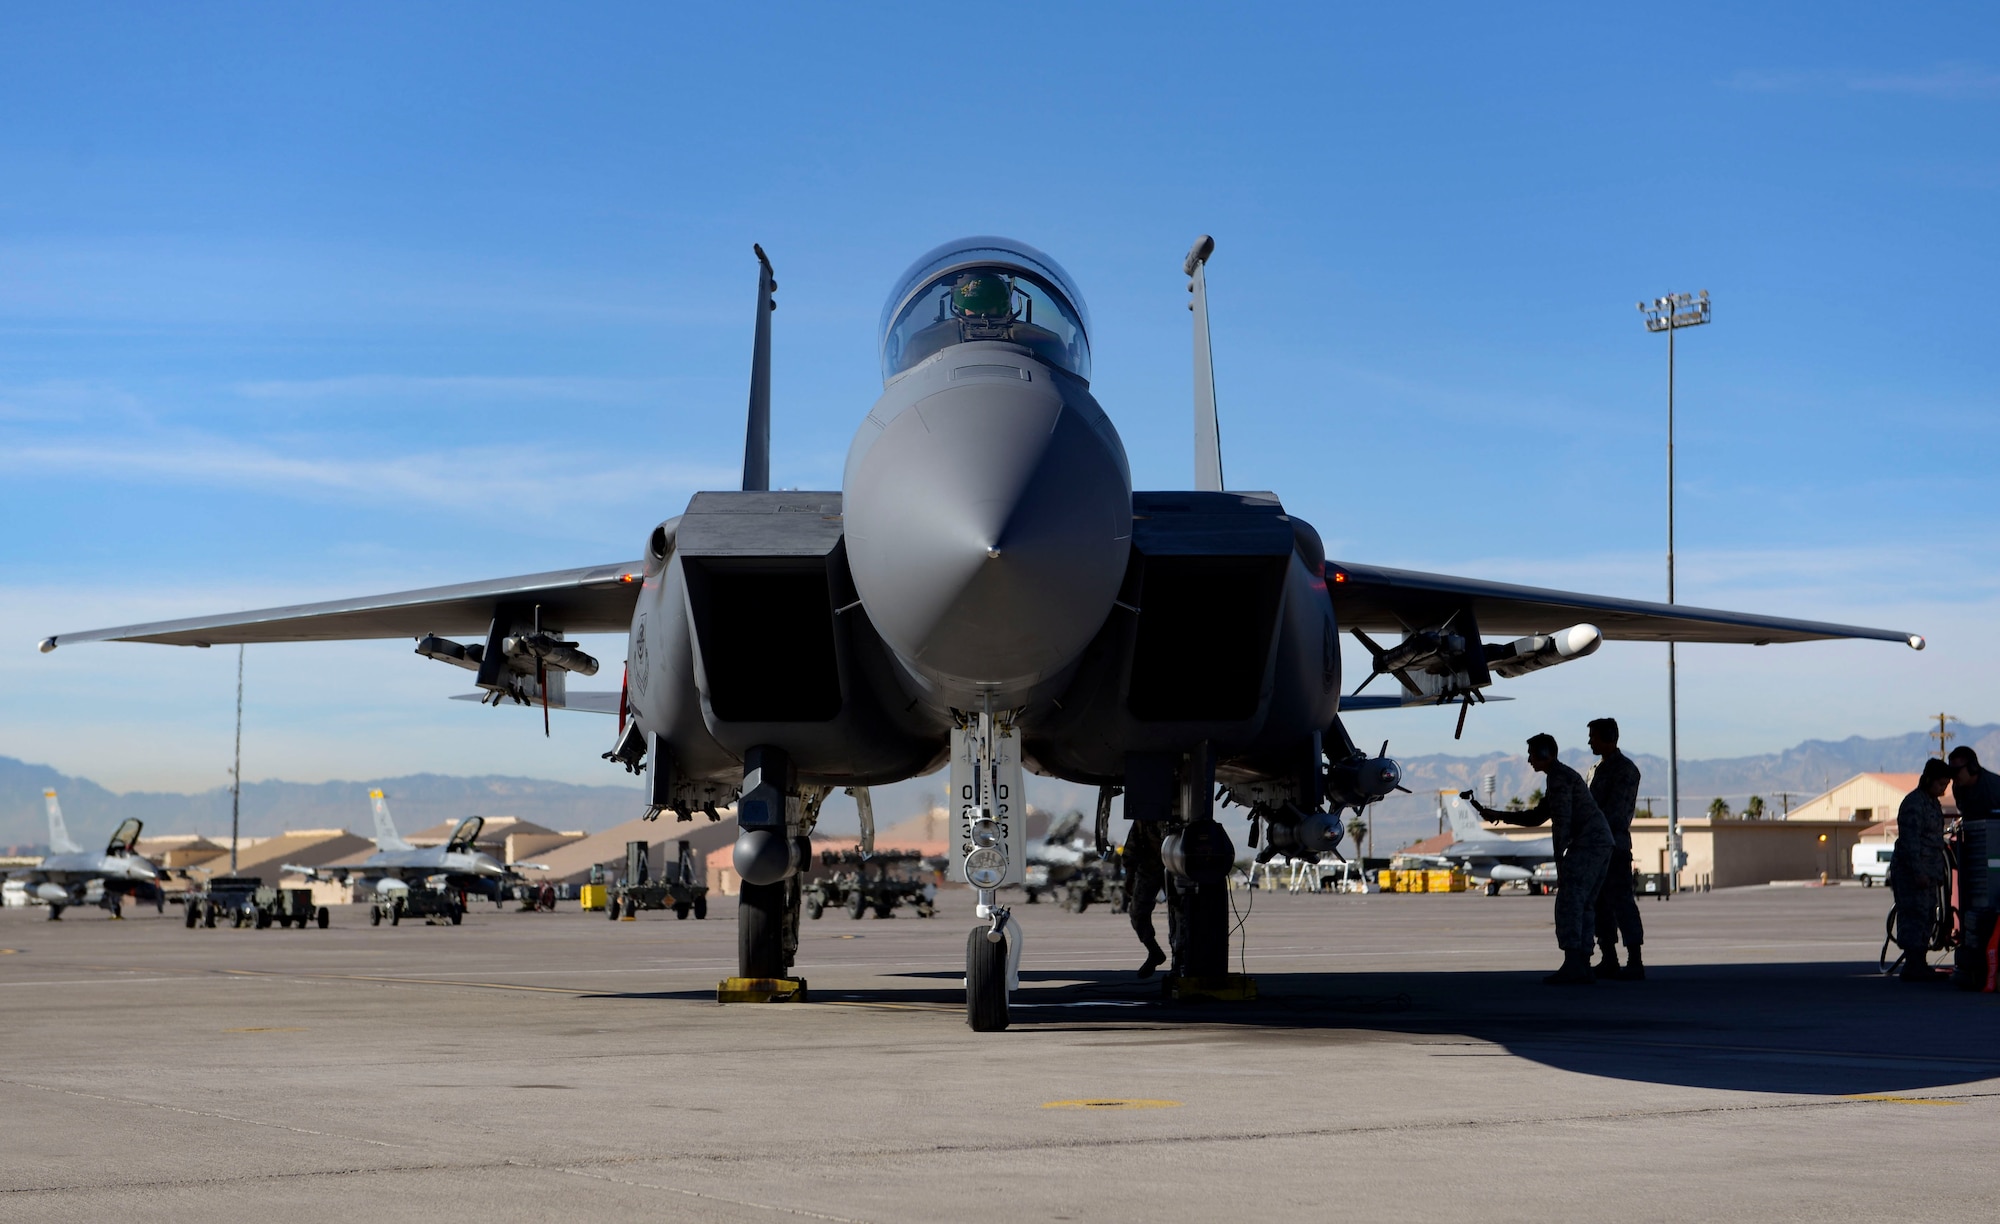 An F-15E Strike Eagle fighter jet prepares to launch during a Gunsmoke Competition Nov. 15, 2018 at Nellis Air Force Base, Nevada. From weapons personnel loading the live weapons and crew chiefs perfectly launching the aircraft, to pilots using those weapons to hit their targets, each team was judged on their safety and execution. (U.S. Air Force photo by Airman Bailee A. Darbasie)